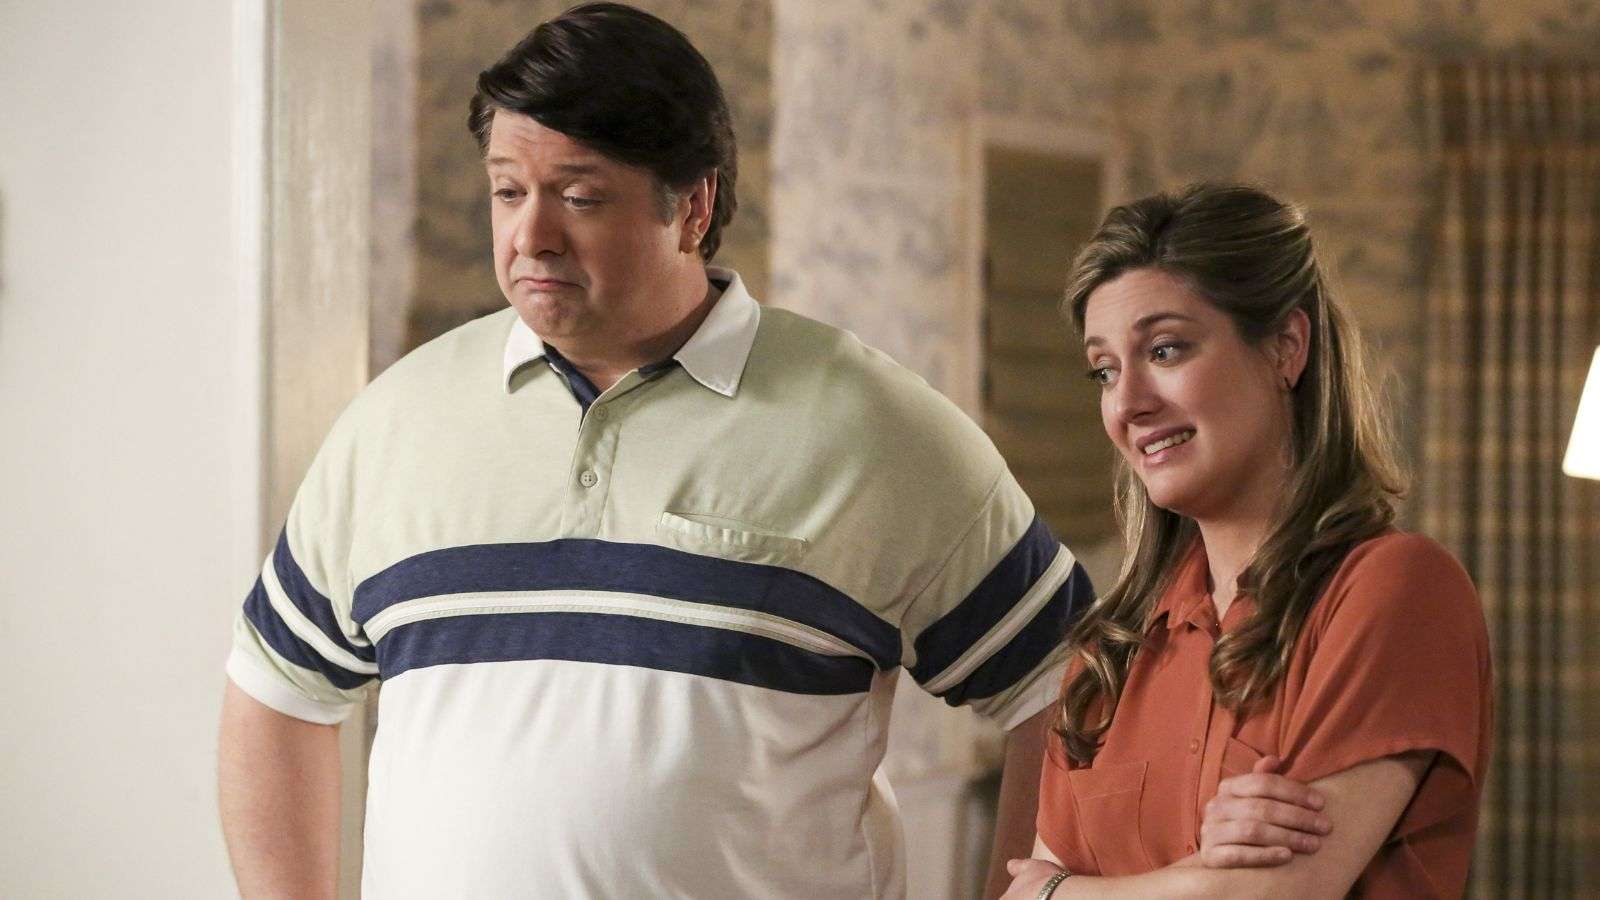 George and Mary in Young Sheldon